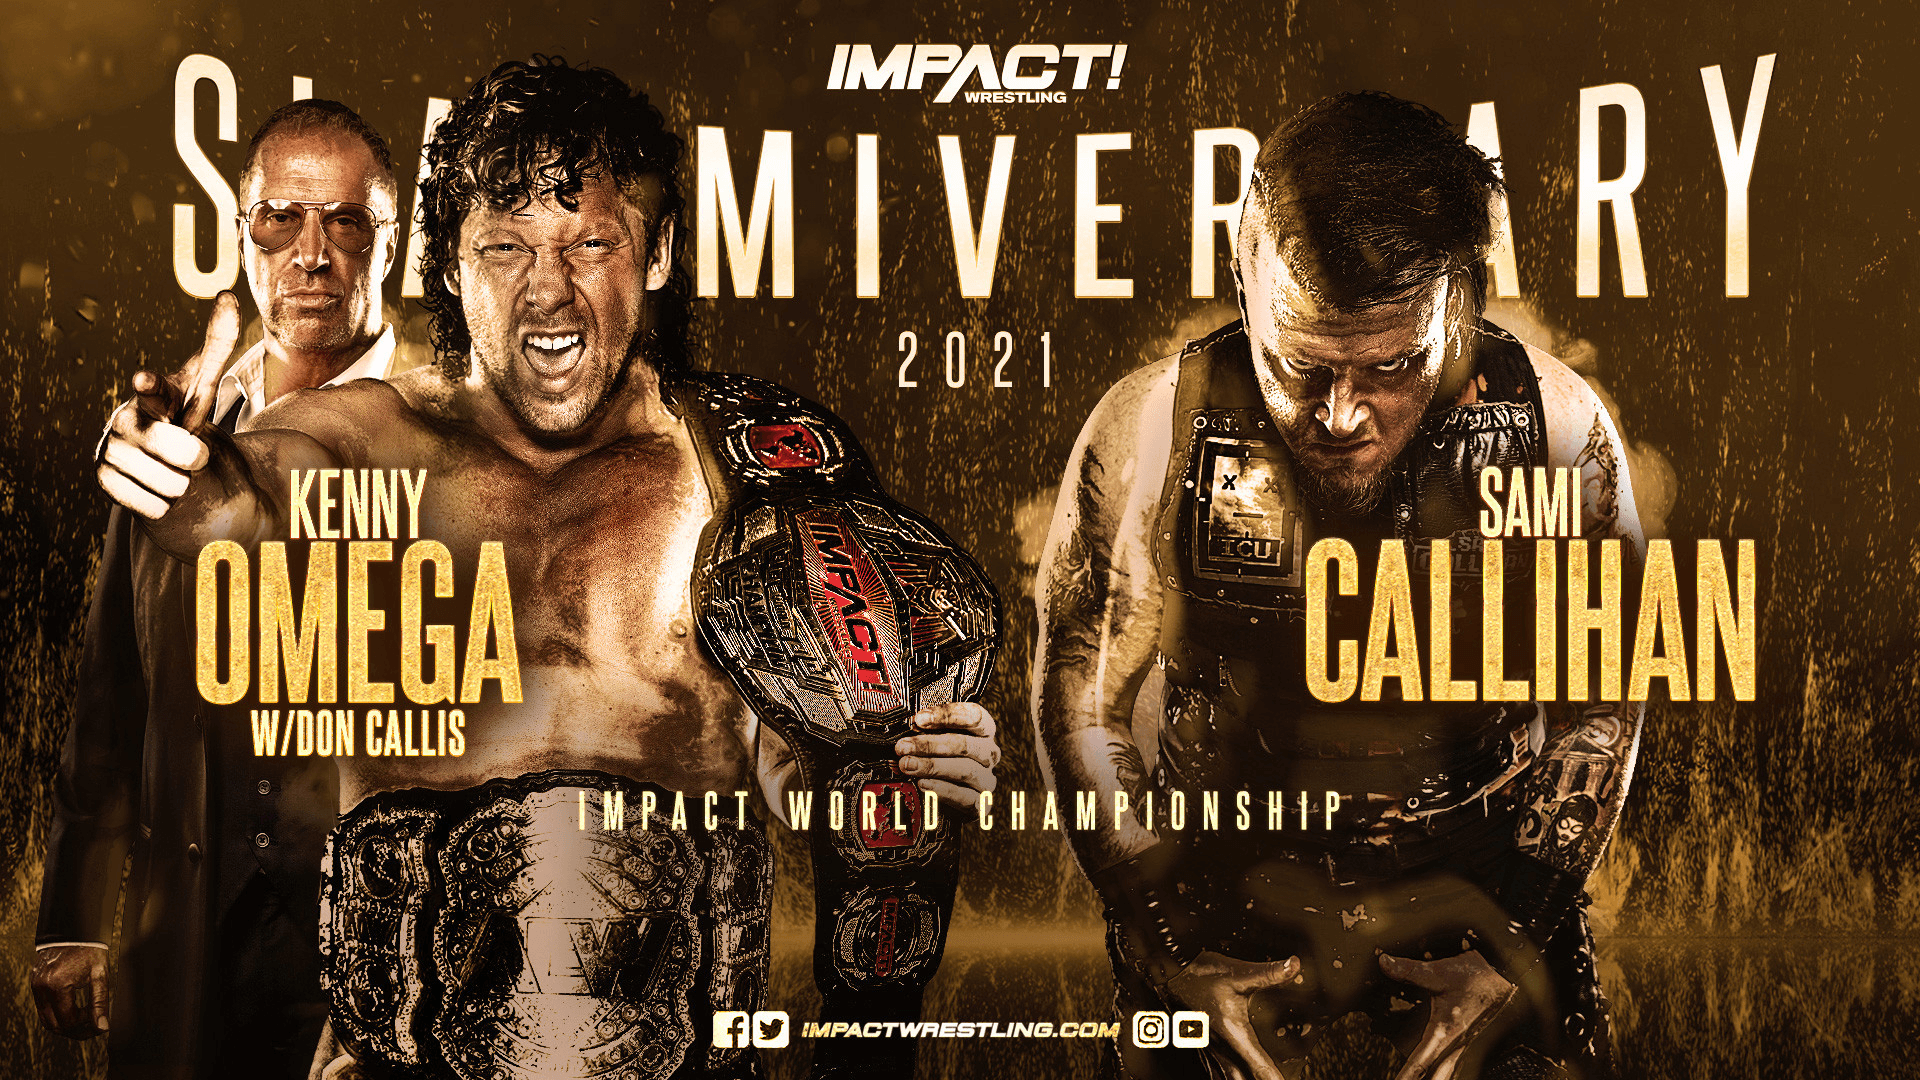 IMPACT Against All Odds Card (6/12/21) - Moose vs Kenny Omega